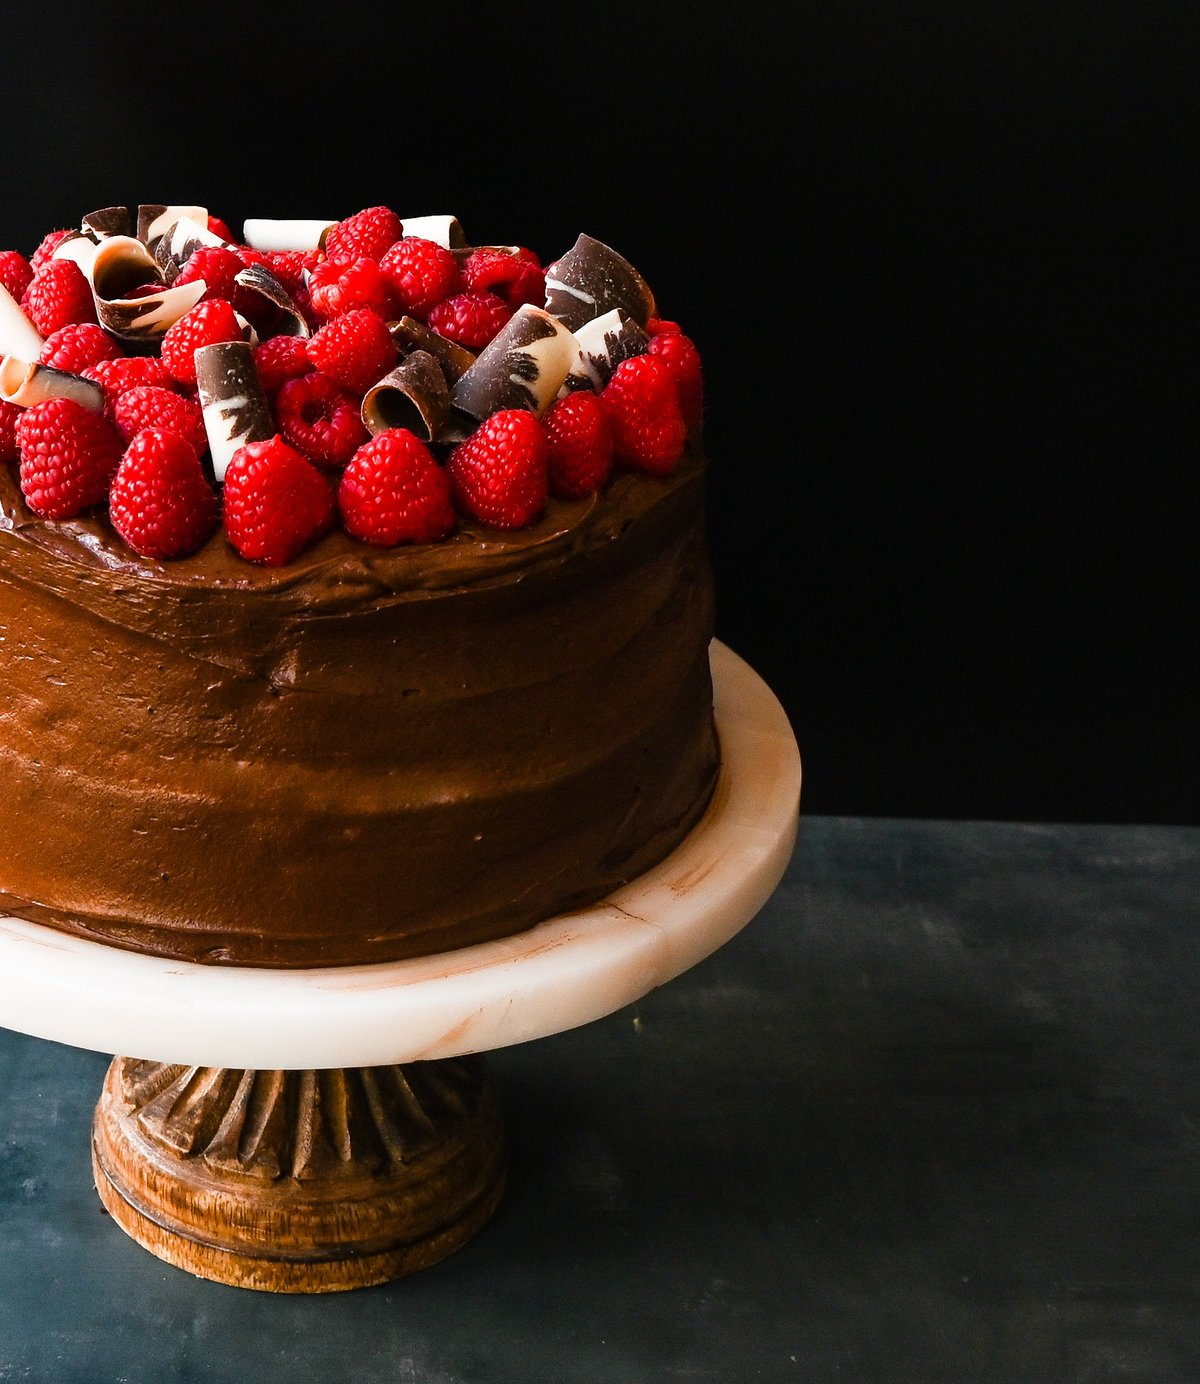 This is the Best Chocolate Raspberry Cake Recipe. Rich layered chocolate cake with whipped cream cheese raspberry filling, topped with creamy chocolate buttercream frosting and fresh raspberries. 